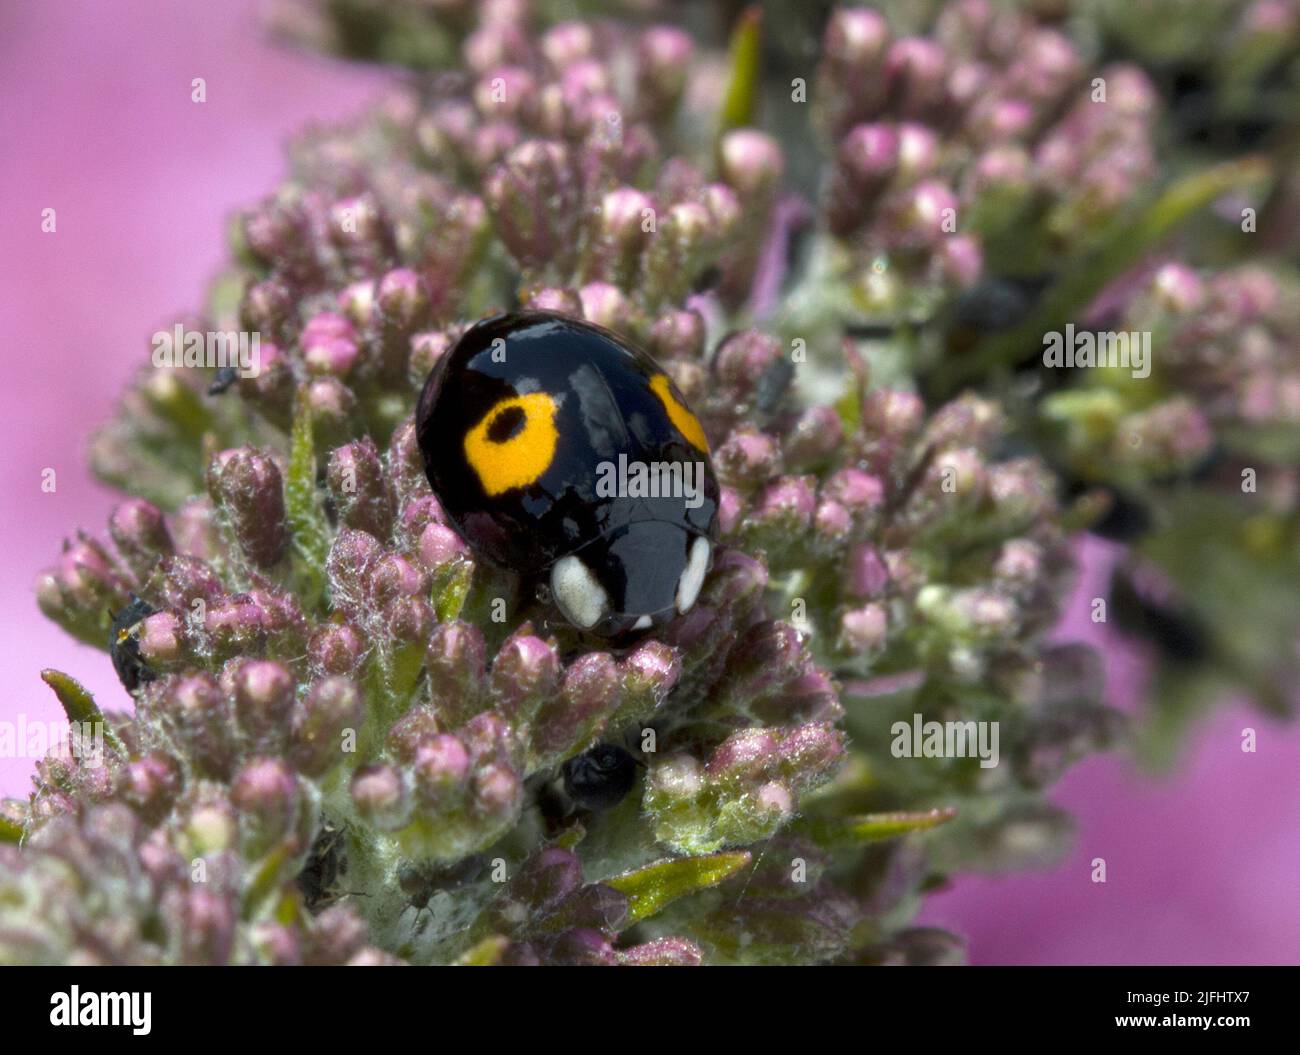 2 Spot Harlequin Ladybird Black with Two Yellow Spots Stock Photo